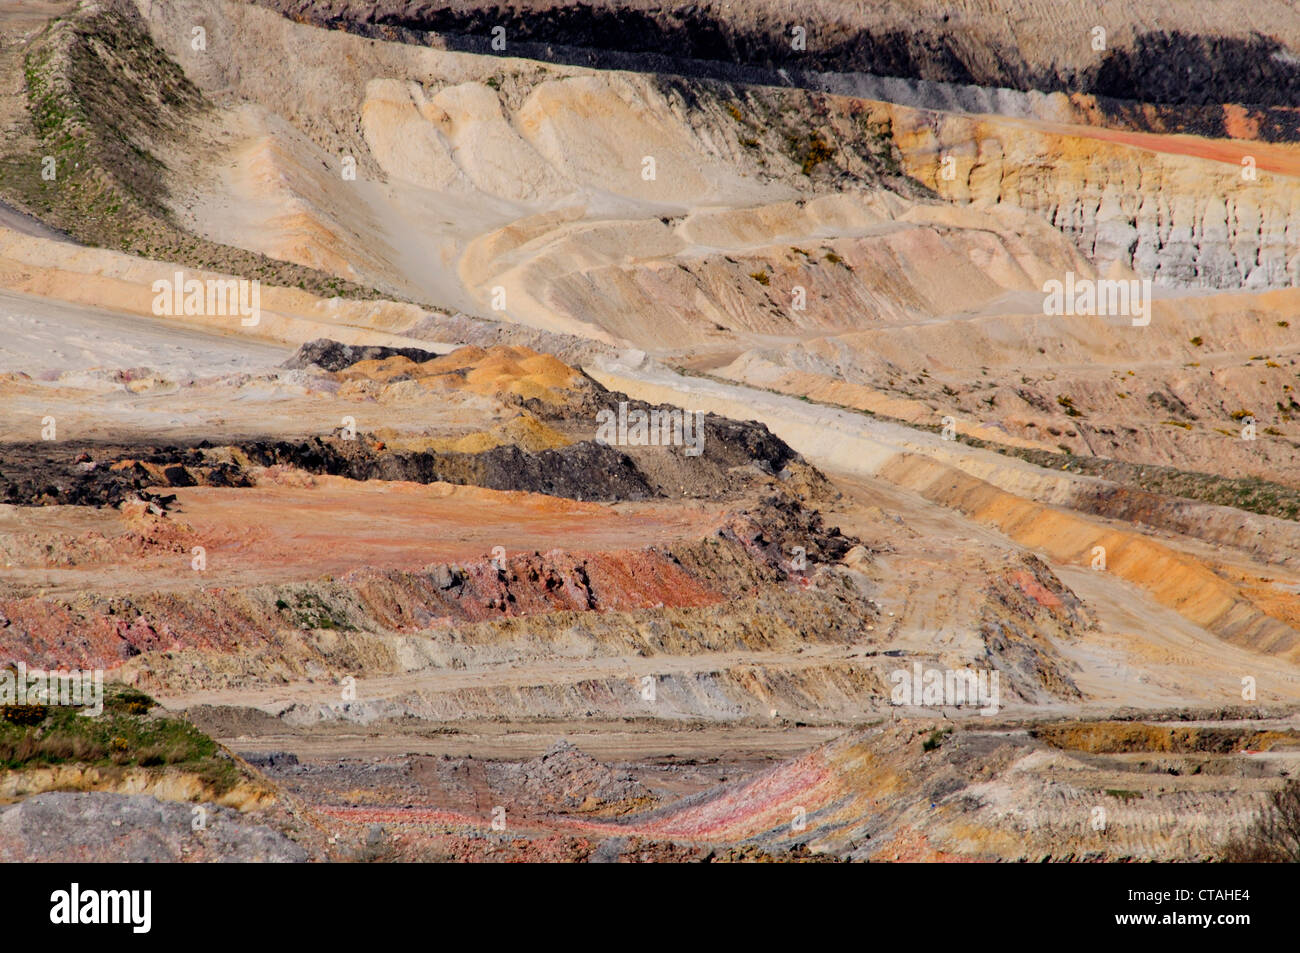 A sand and gravel quarry in Dorset UK Stock Photo